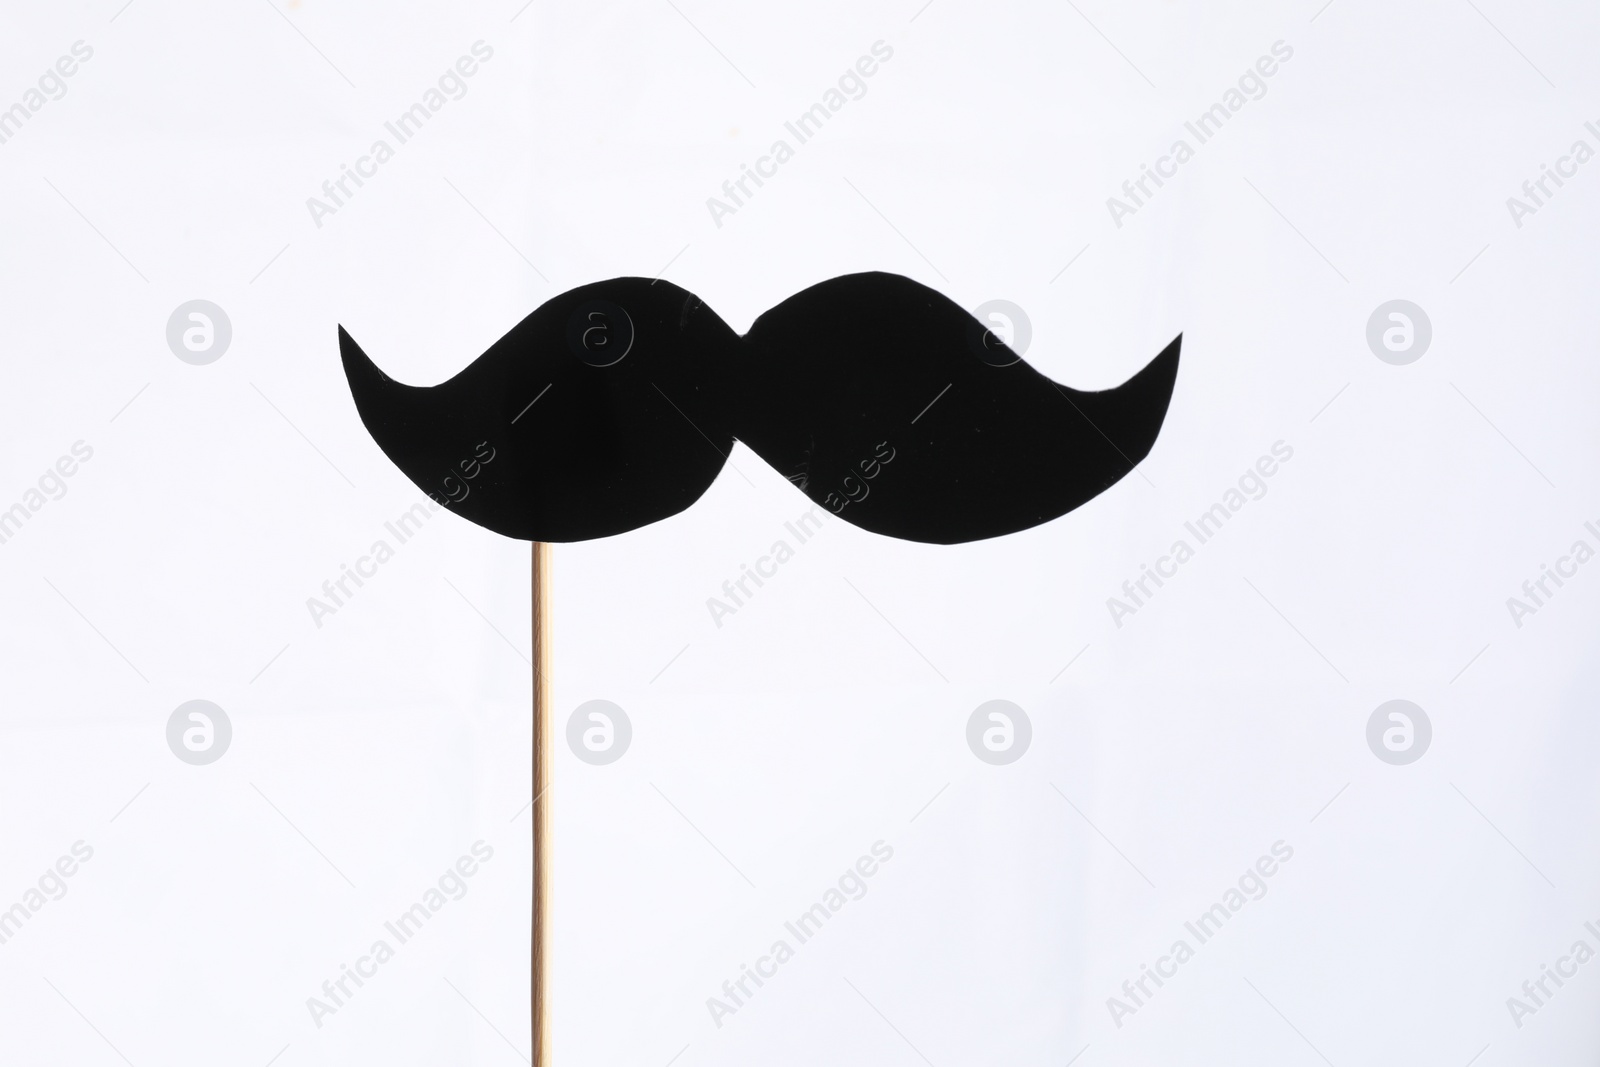 Photo of Fake paper mustache party prop against white background